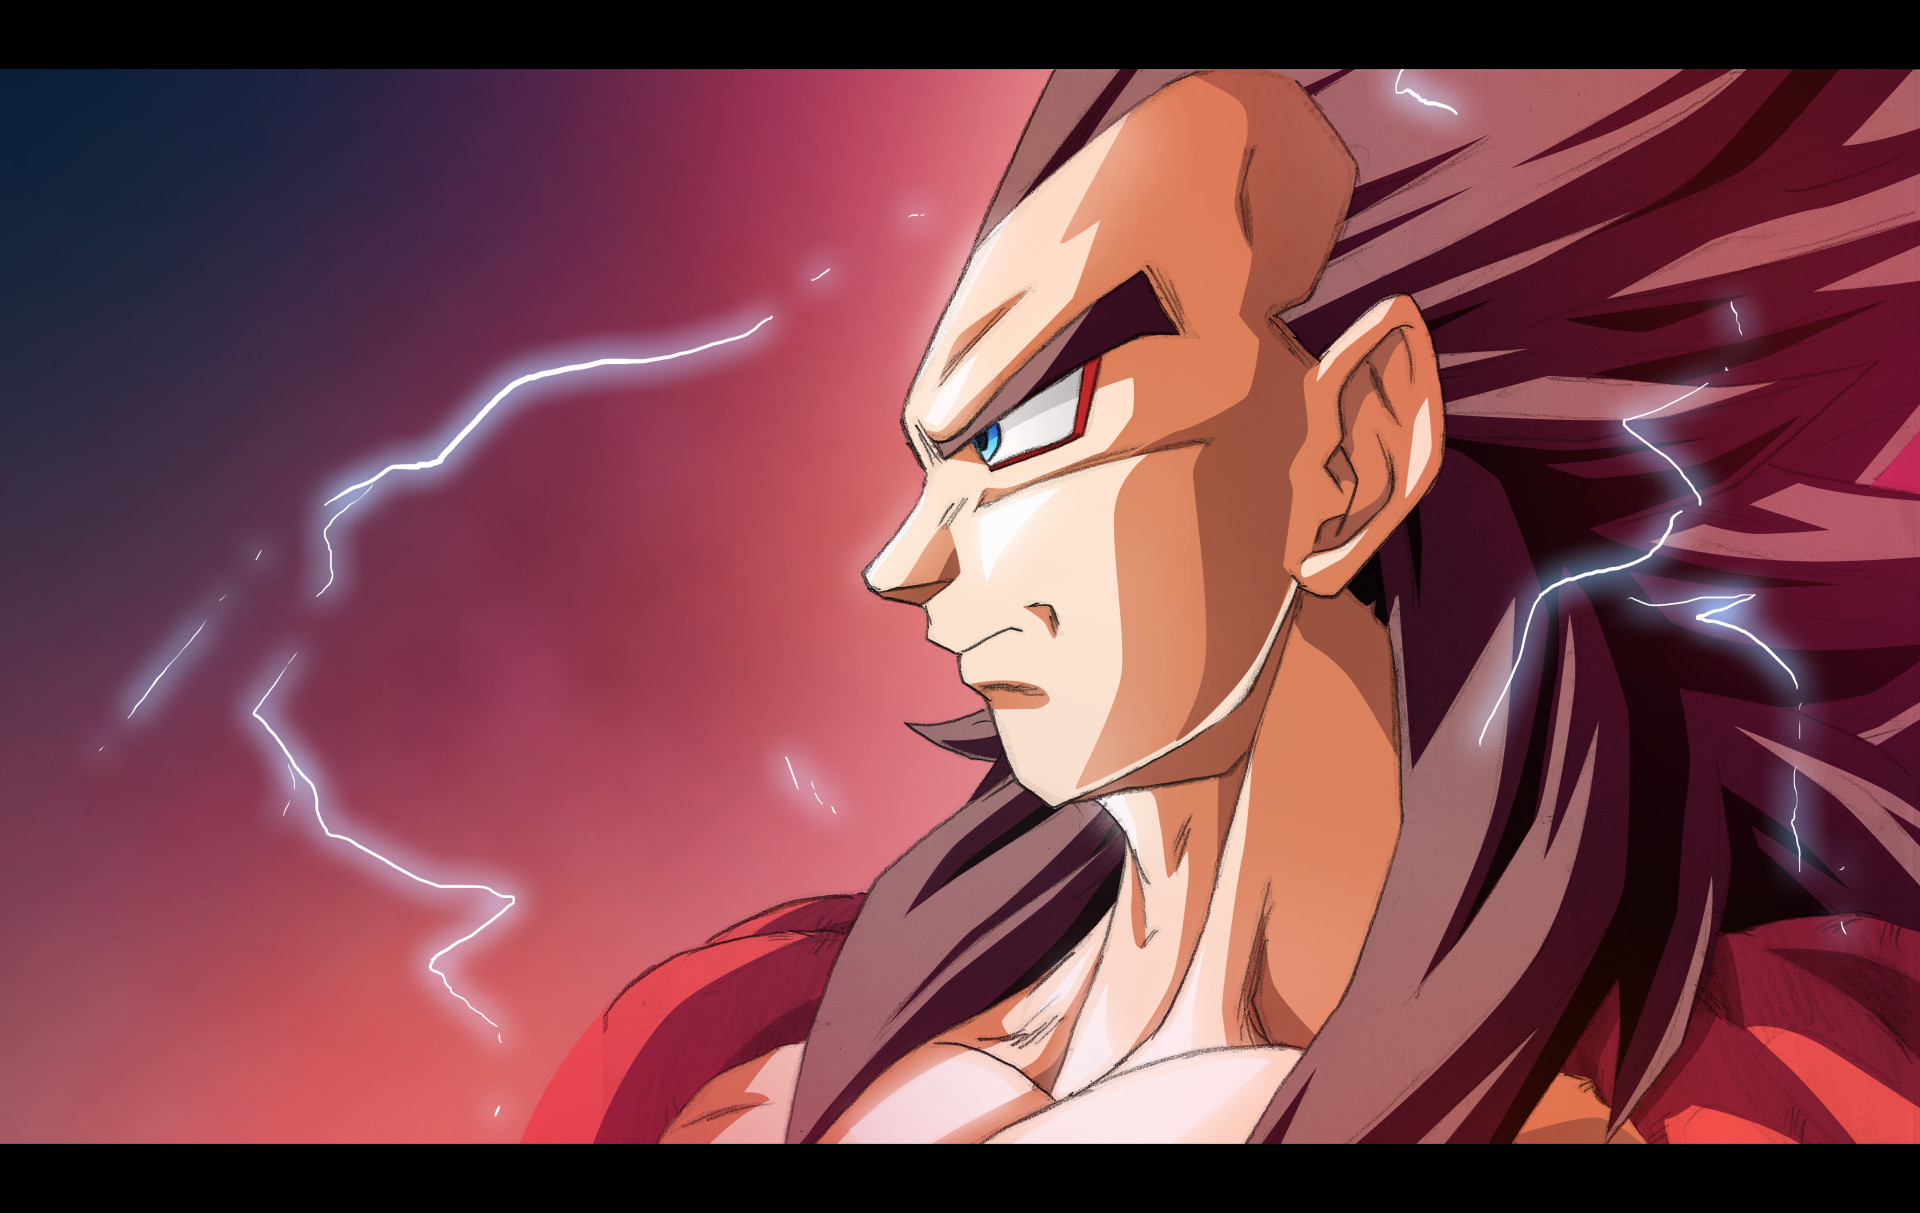 Vegeta in Super Saiyan I still hope this form will also appear in Dragon Ball Super. It was an awesome form. I like Super Saiyan God, but feels like what a